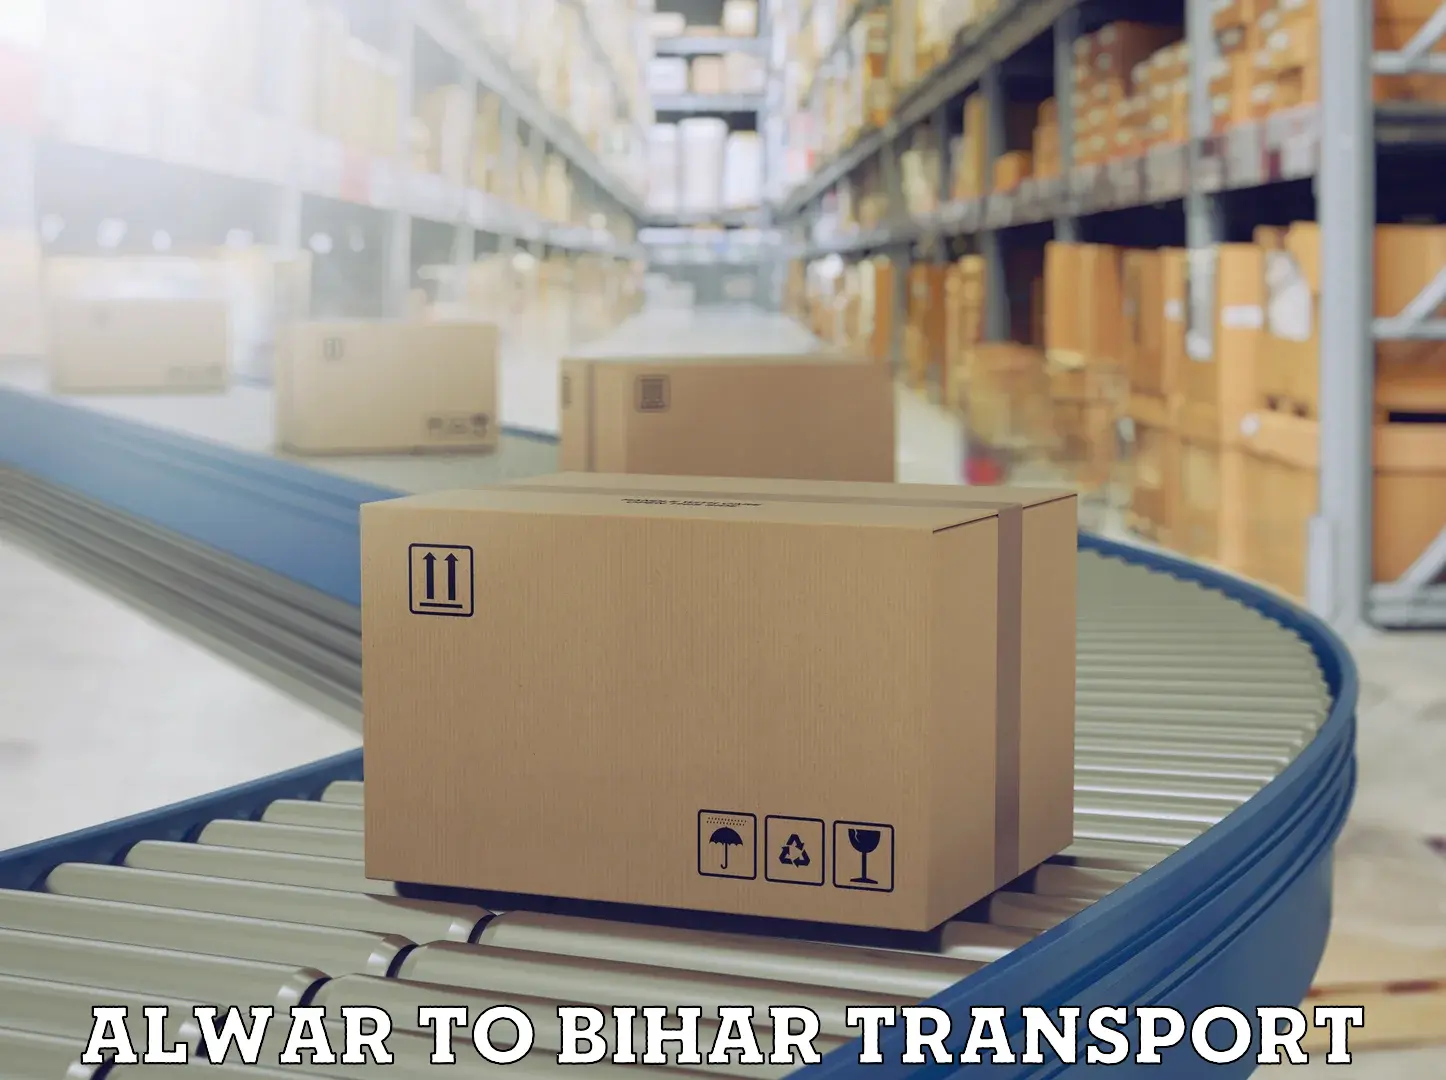 Container transport service Alwar to Piro